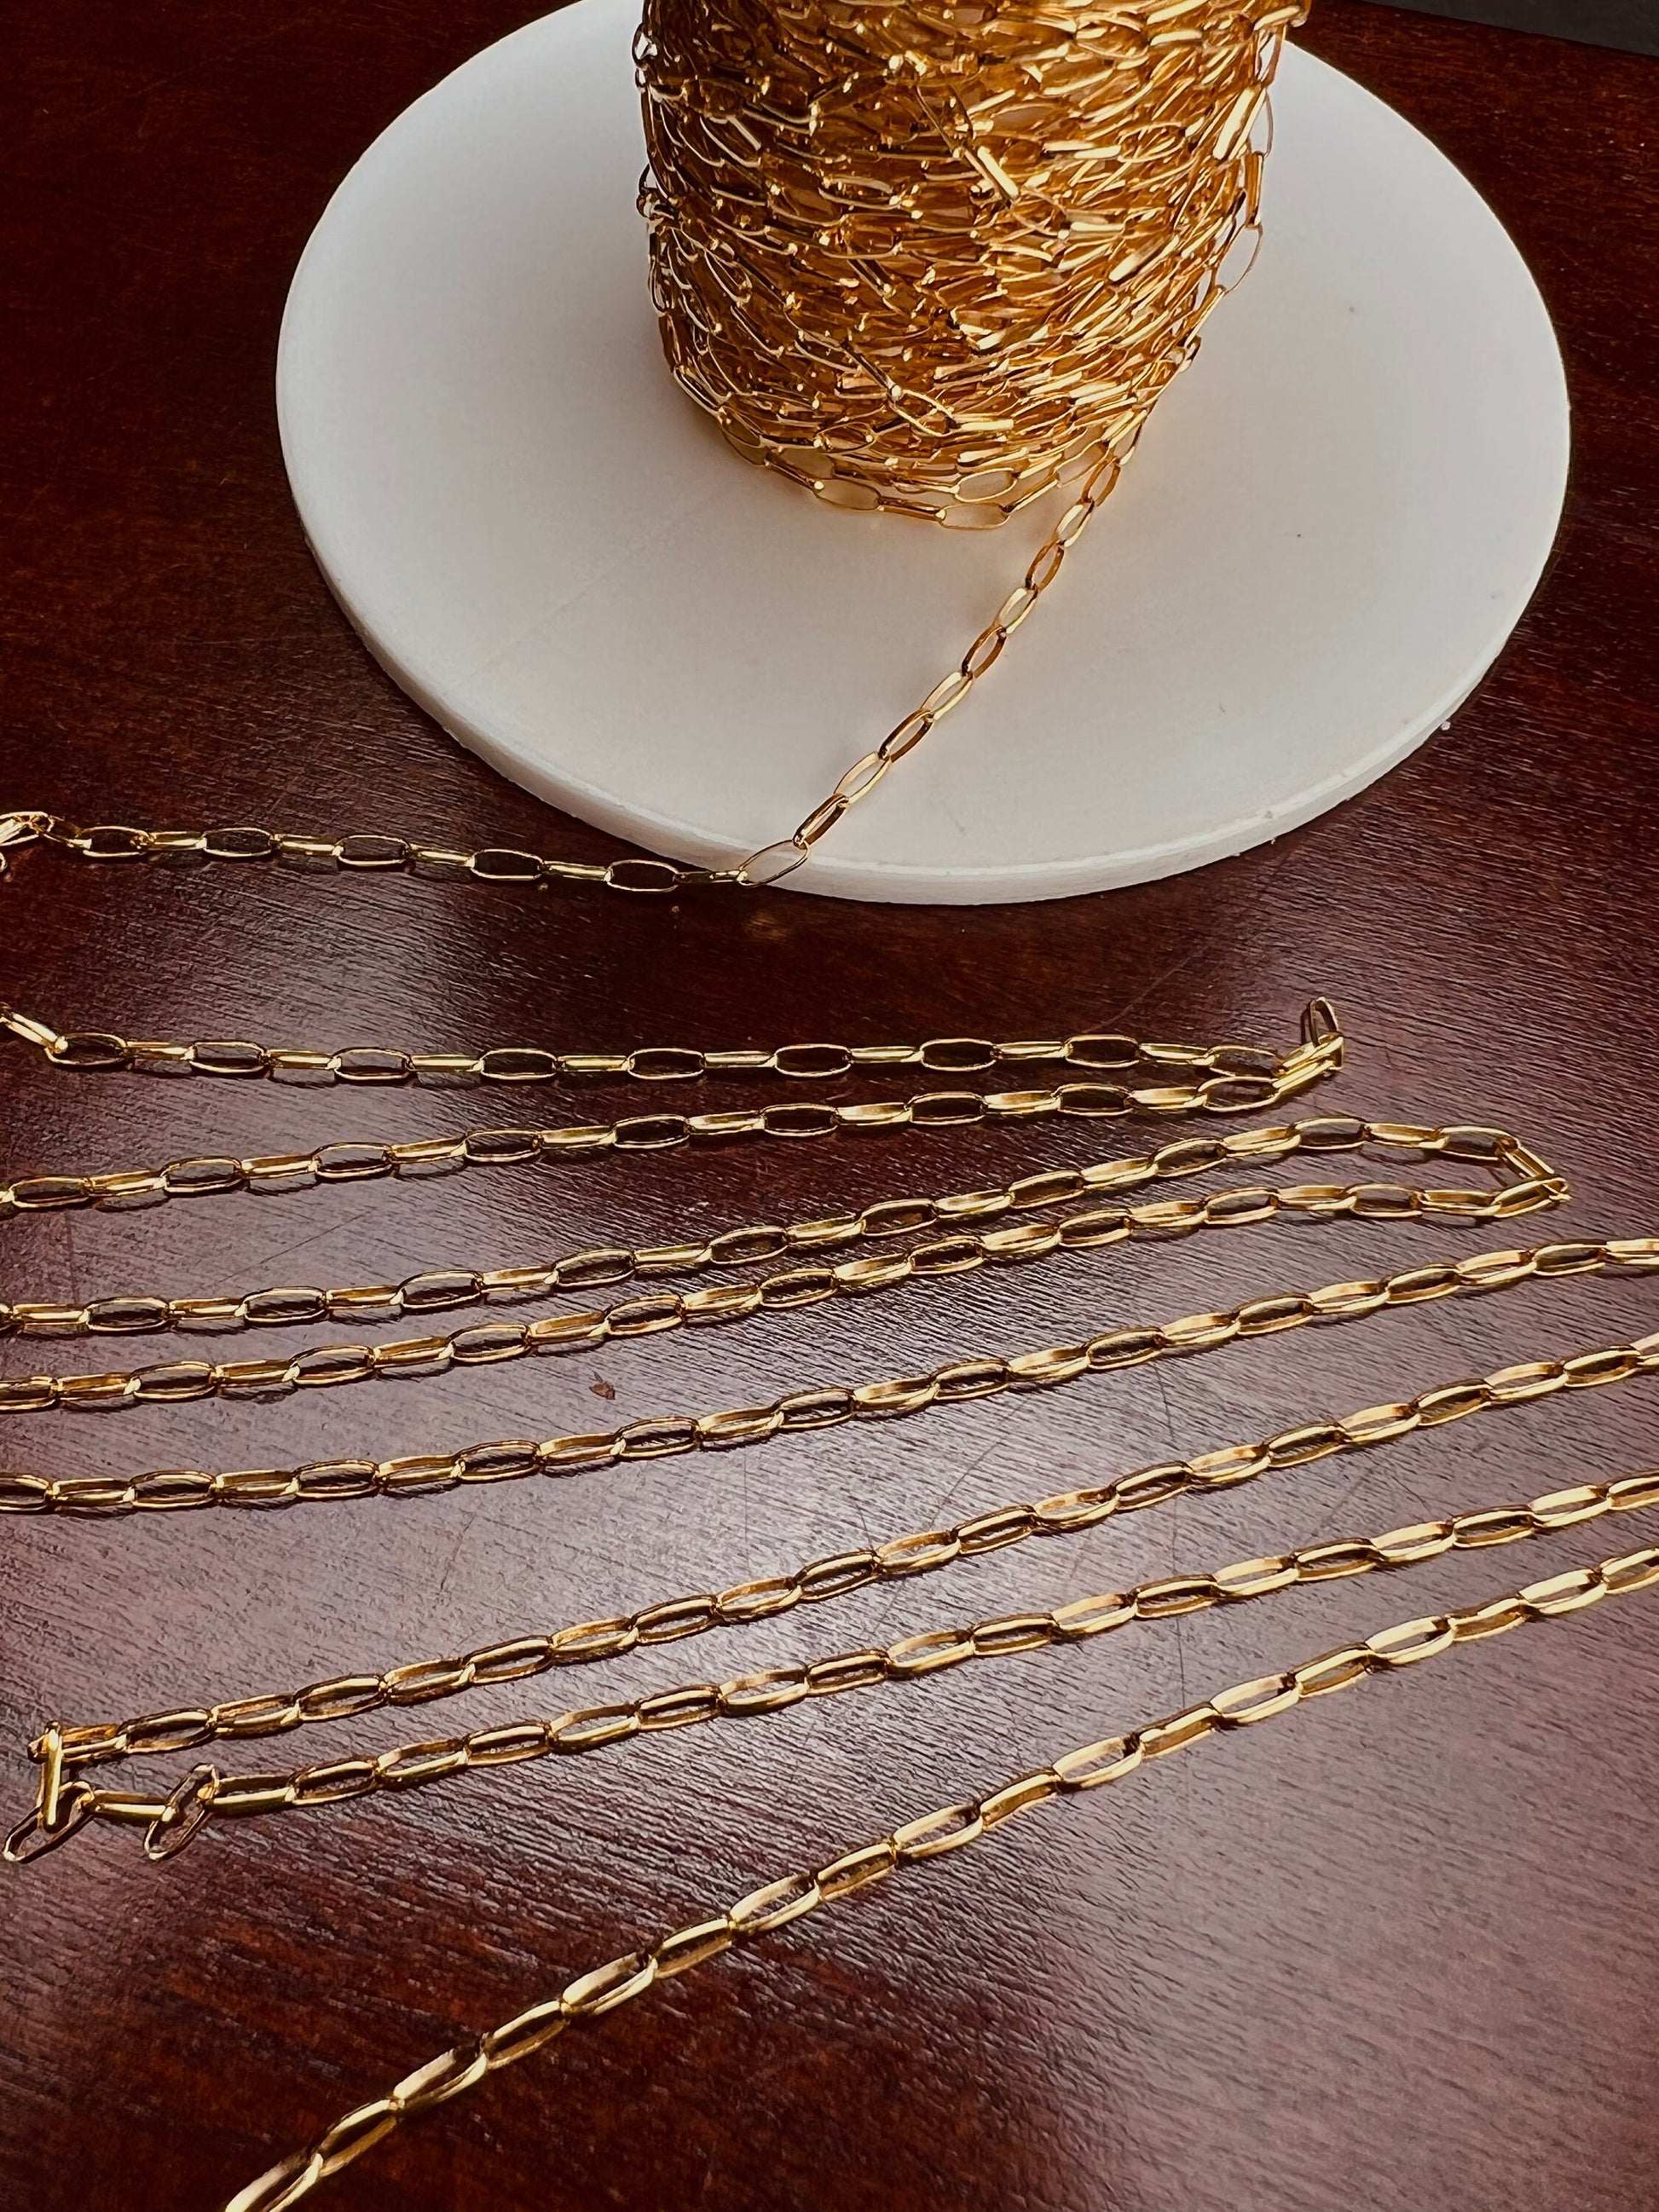 14K Gold Filled long oval Chain 1.6x4.5mm long light weight Jewelry Making Italian Chain